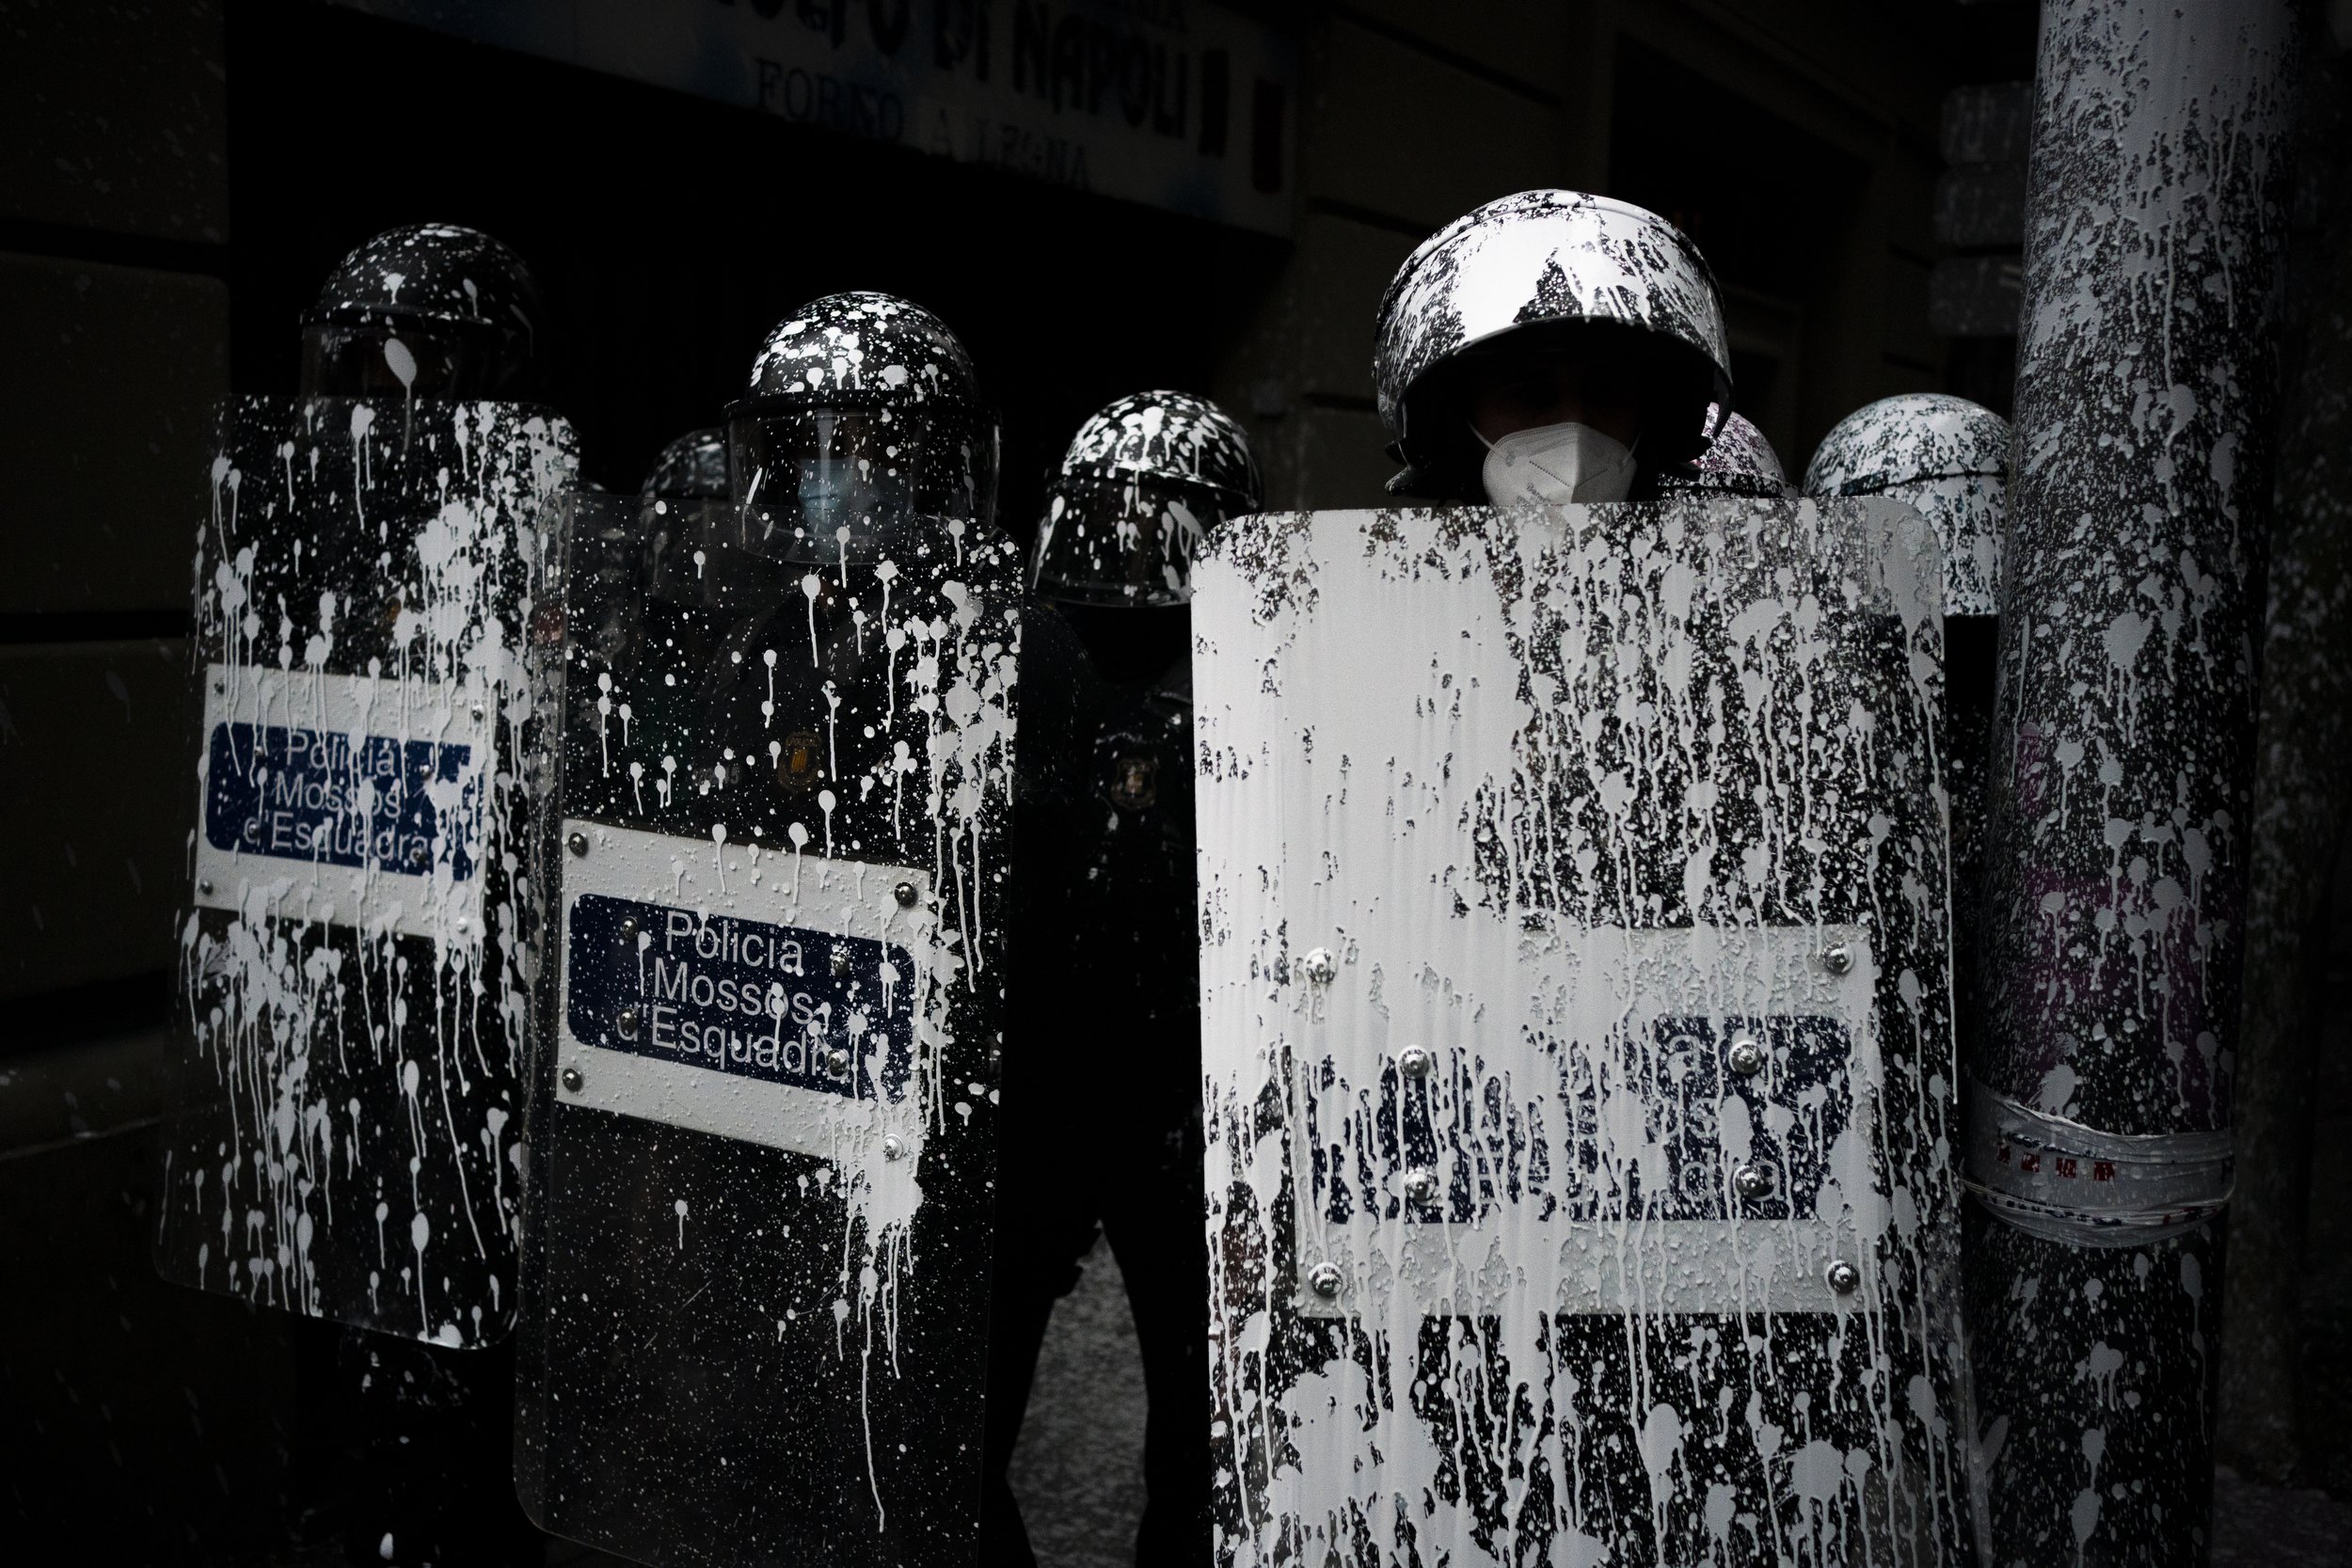  Riot police officers covered by paint thrown by protesters stand guard as activists try to stop the eviction of Axel Altadill from his apartment in Barcelona, Spain, on May 25, 2021. Altadill has been accused of squatting in the apartment since Janu